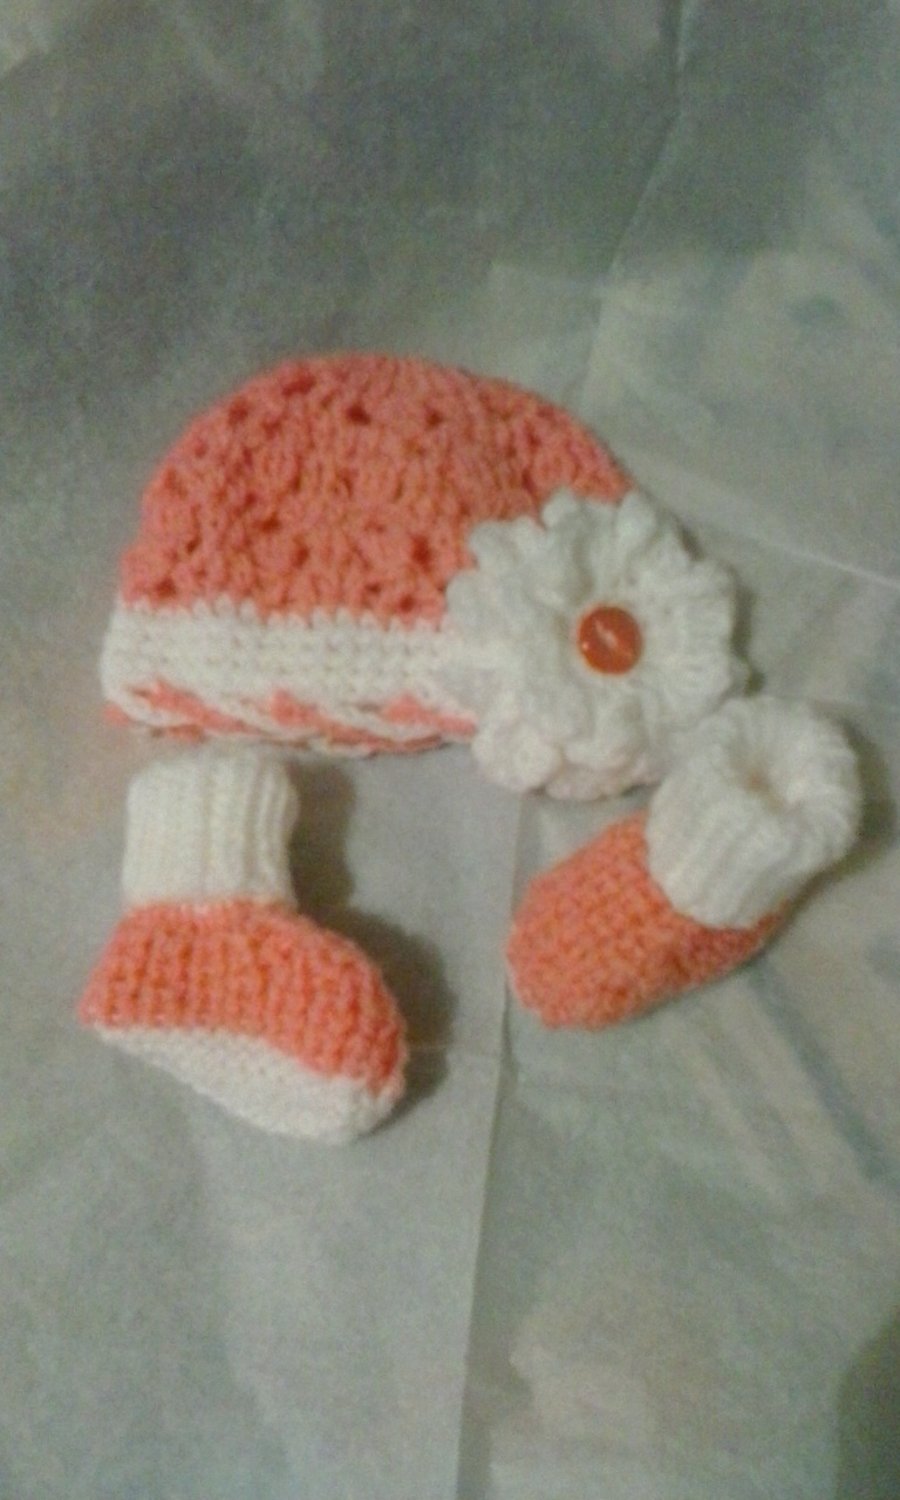 Handknitted baby flower bonnet and booties set 